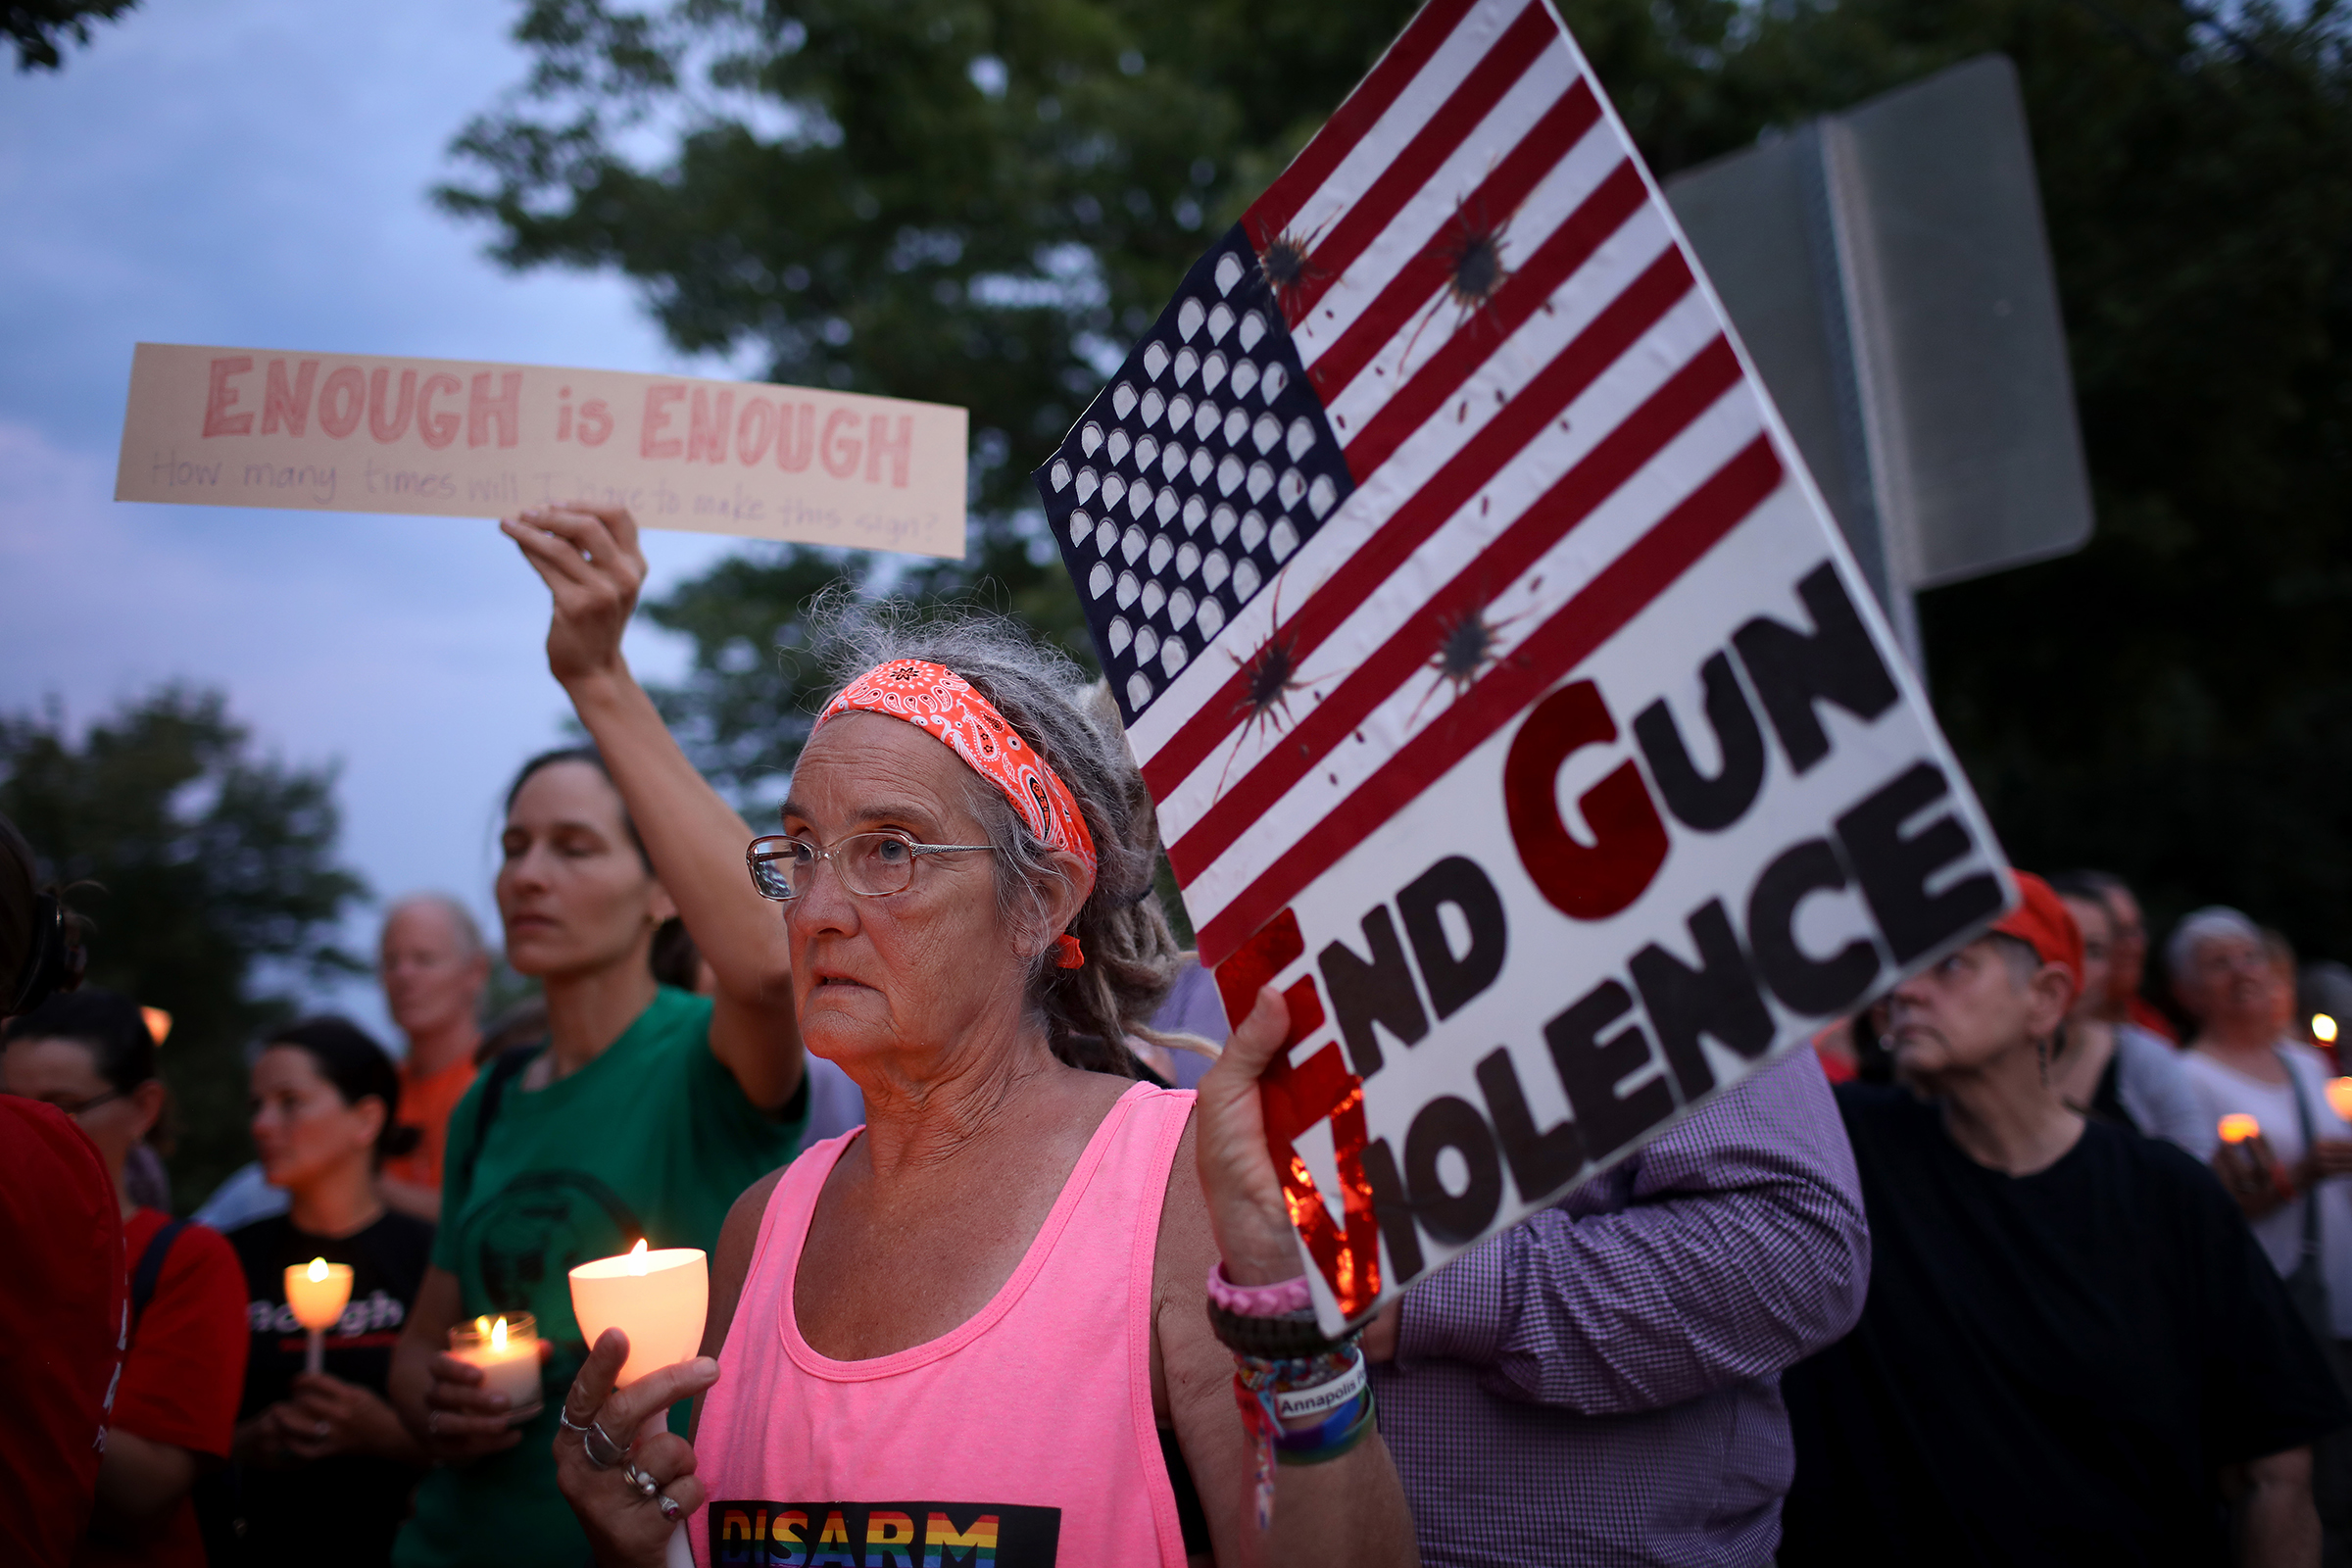 Advocates of gun reform hold a vigil for victims of mass shootings outside the headquarters of the National Rifle Association (NRA) on August 5, 2019 in Fairfax, Va. (Win McNamee—Getty Images)